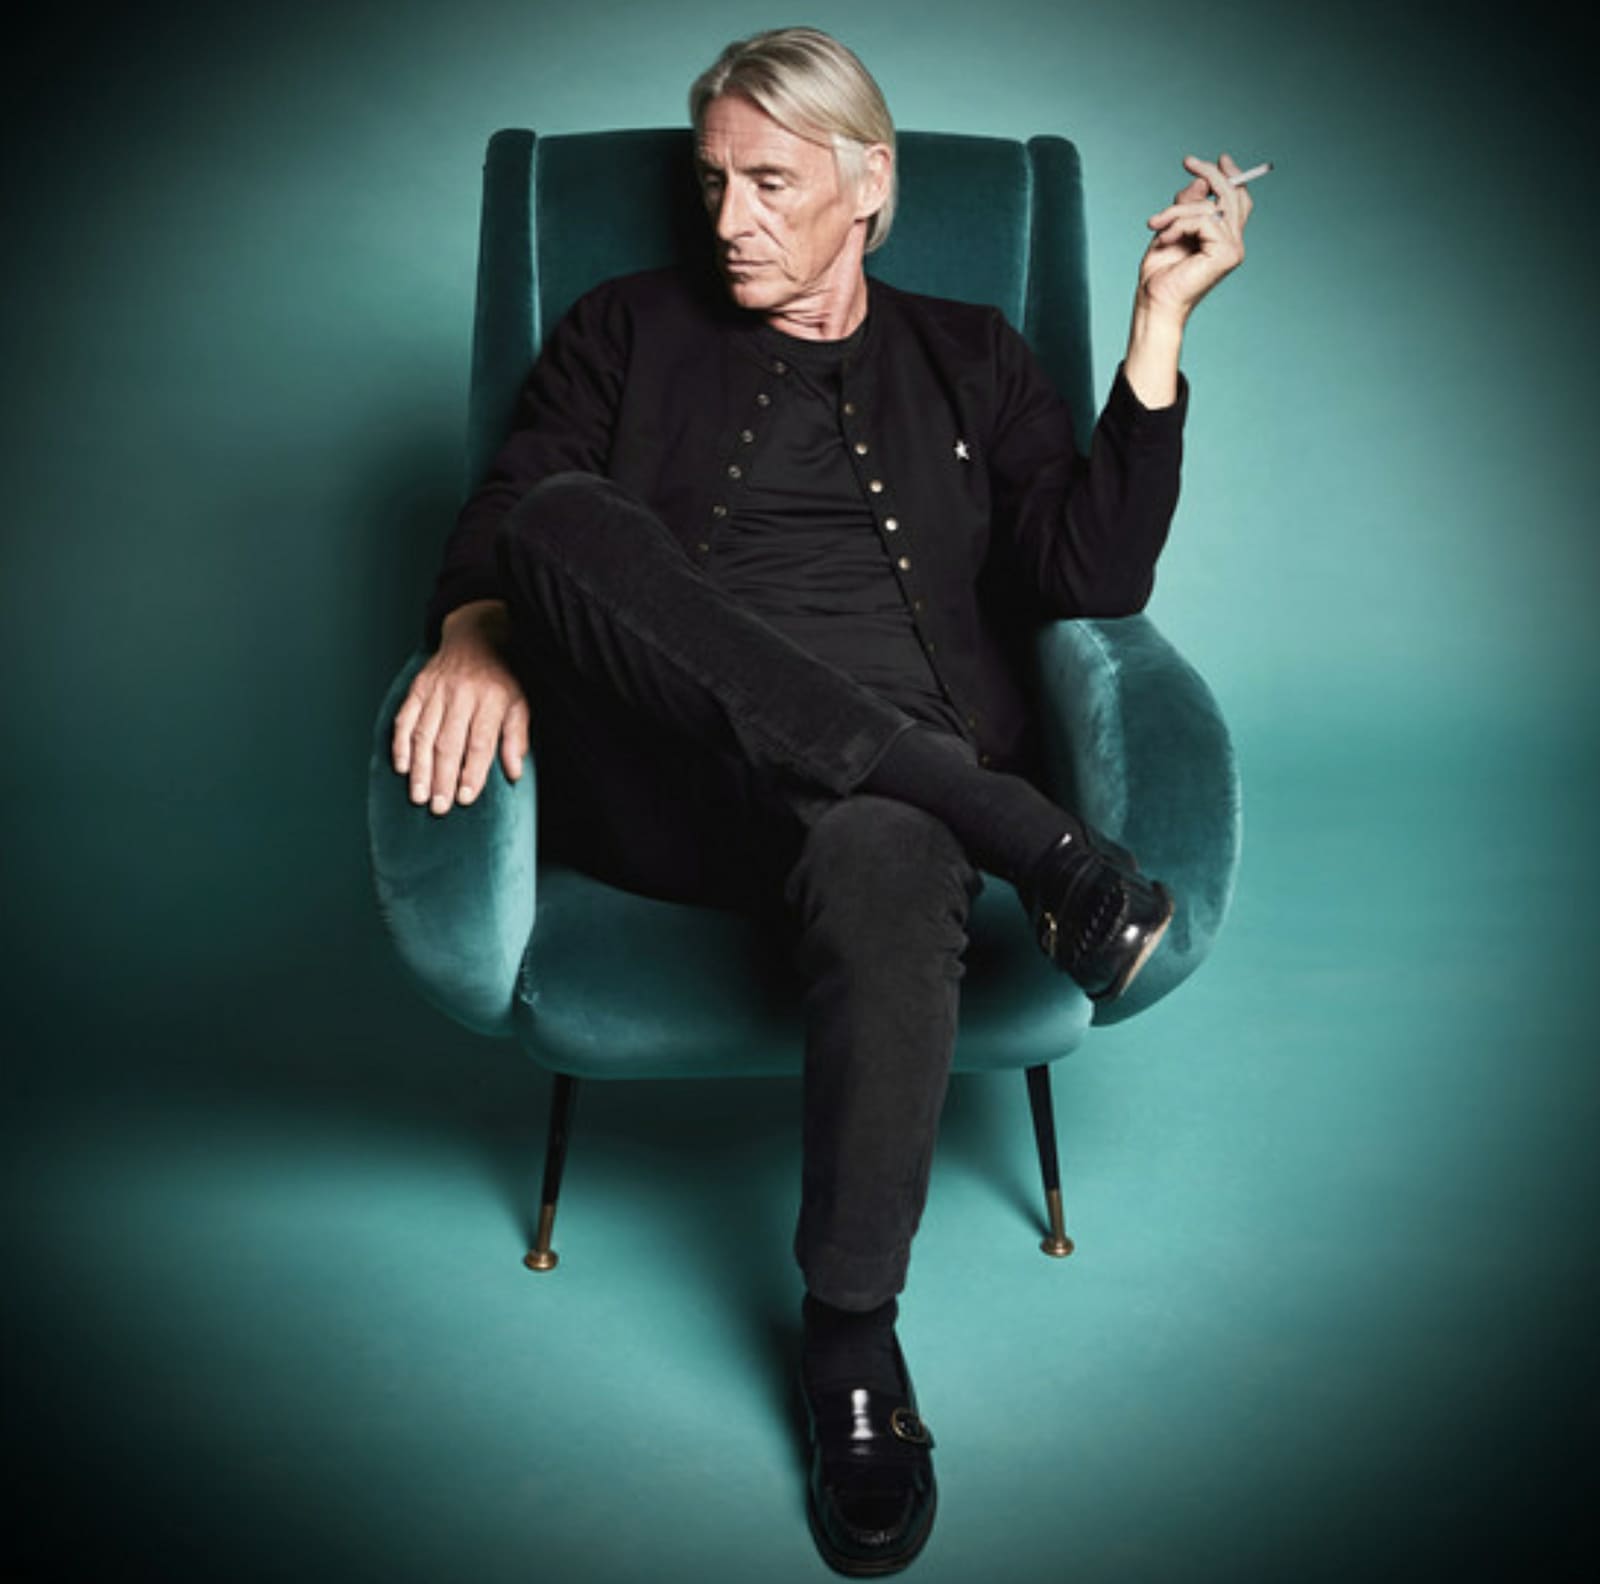 Paul Weller at Scarborough Open Air Theatre Tickets